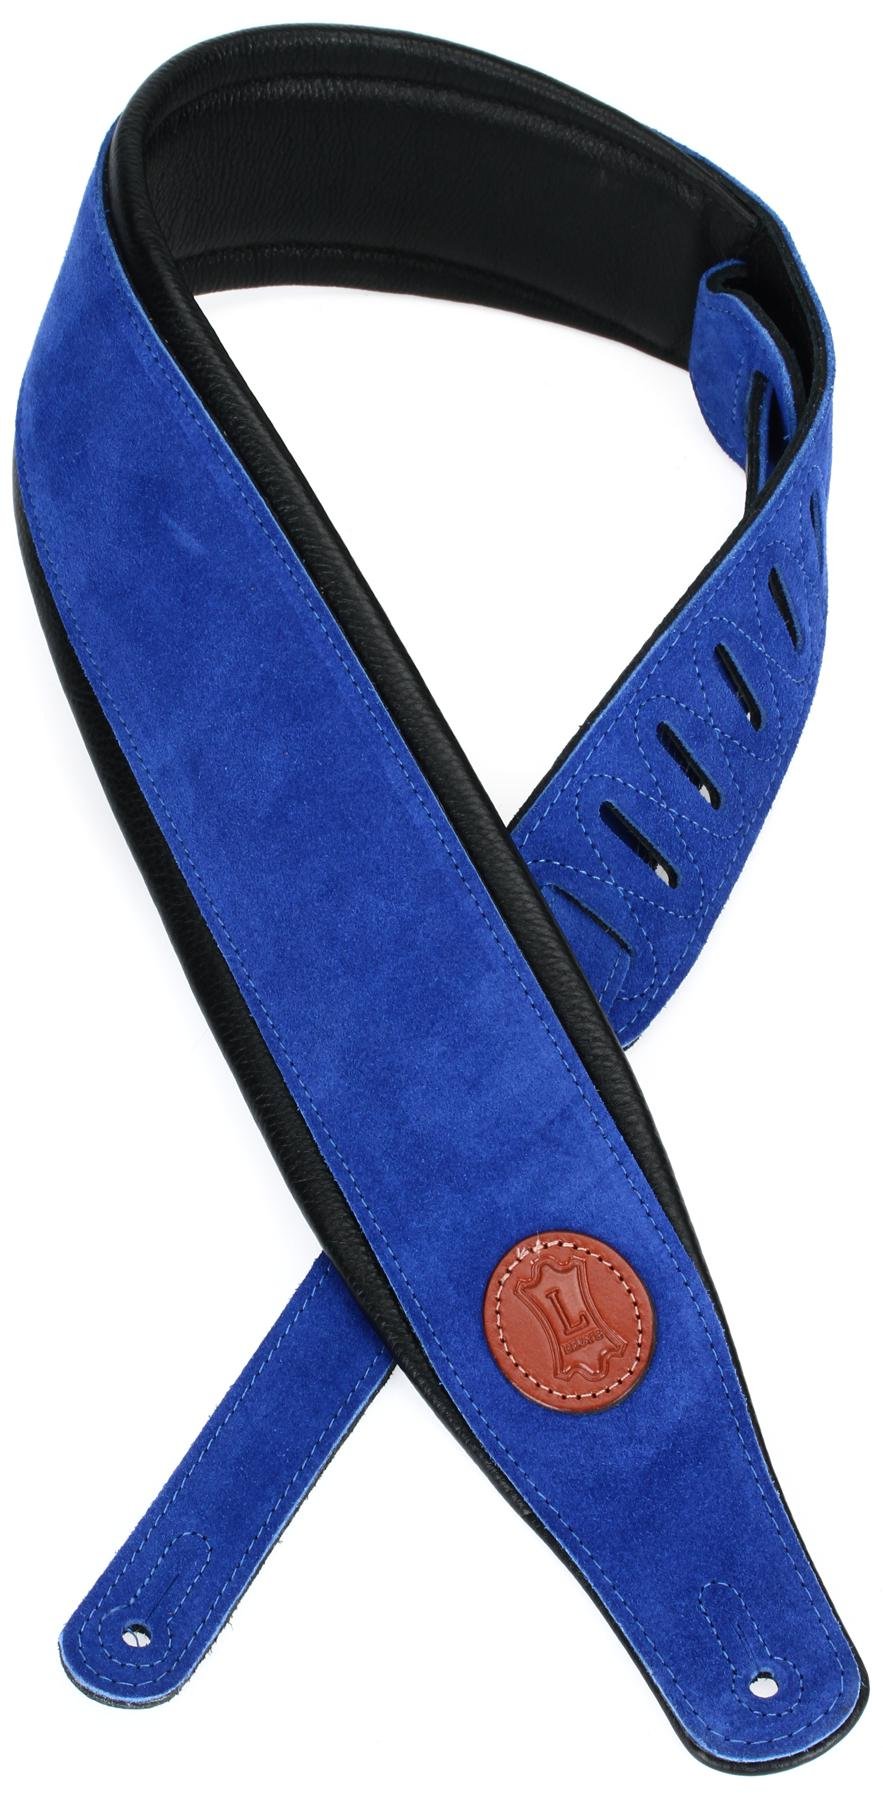 MSS2S-ROY Levys Leathers 3Suede Guitar Strap with Garment Leather Backing; Royal Blue